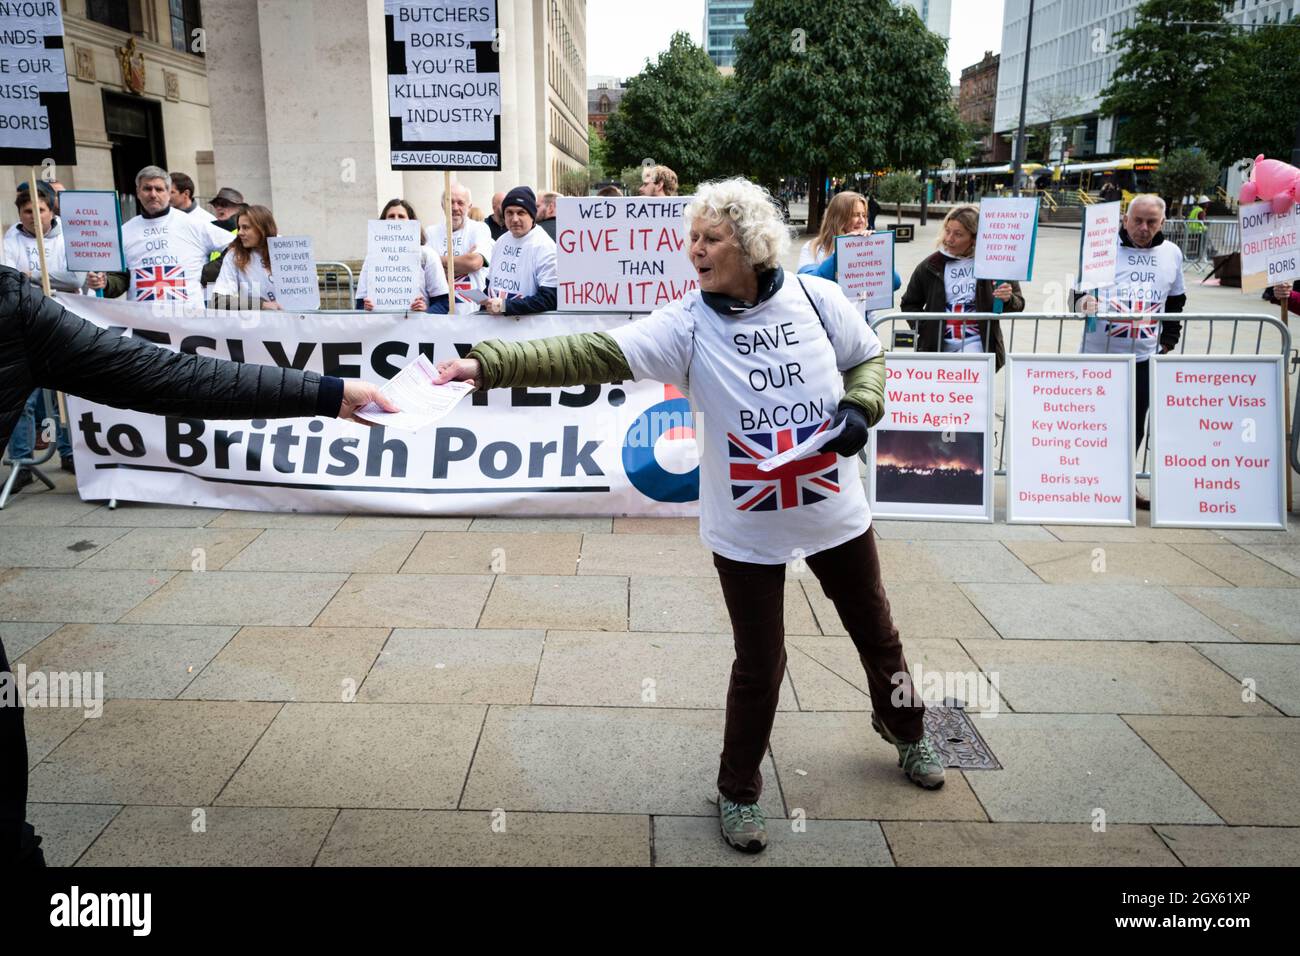 Manchester, UK. 04th Oct, 2021. Pig farmers hand out flyers outside the Conservative Party Conference. British farmers protest against the Tory Party due to implications caused by Brexit, which has resulted in skills shortages and restrictions.ÊAndy Barton/Alamy Live News Credit: Andy Barton/Alamy Live News Stock Photo